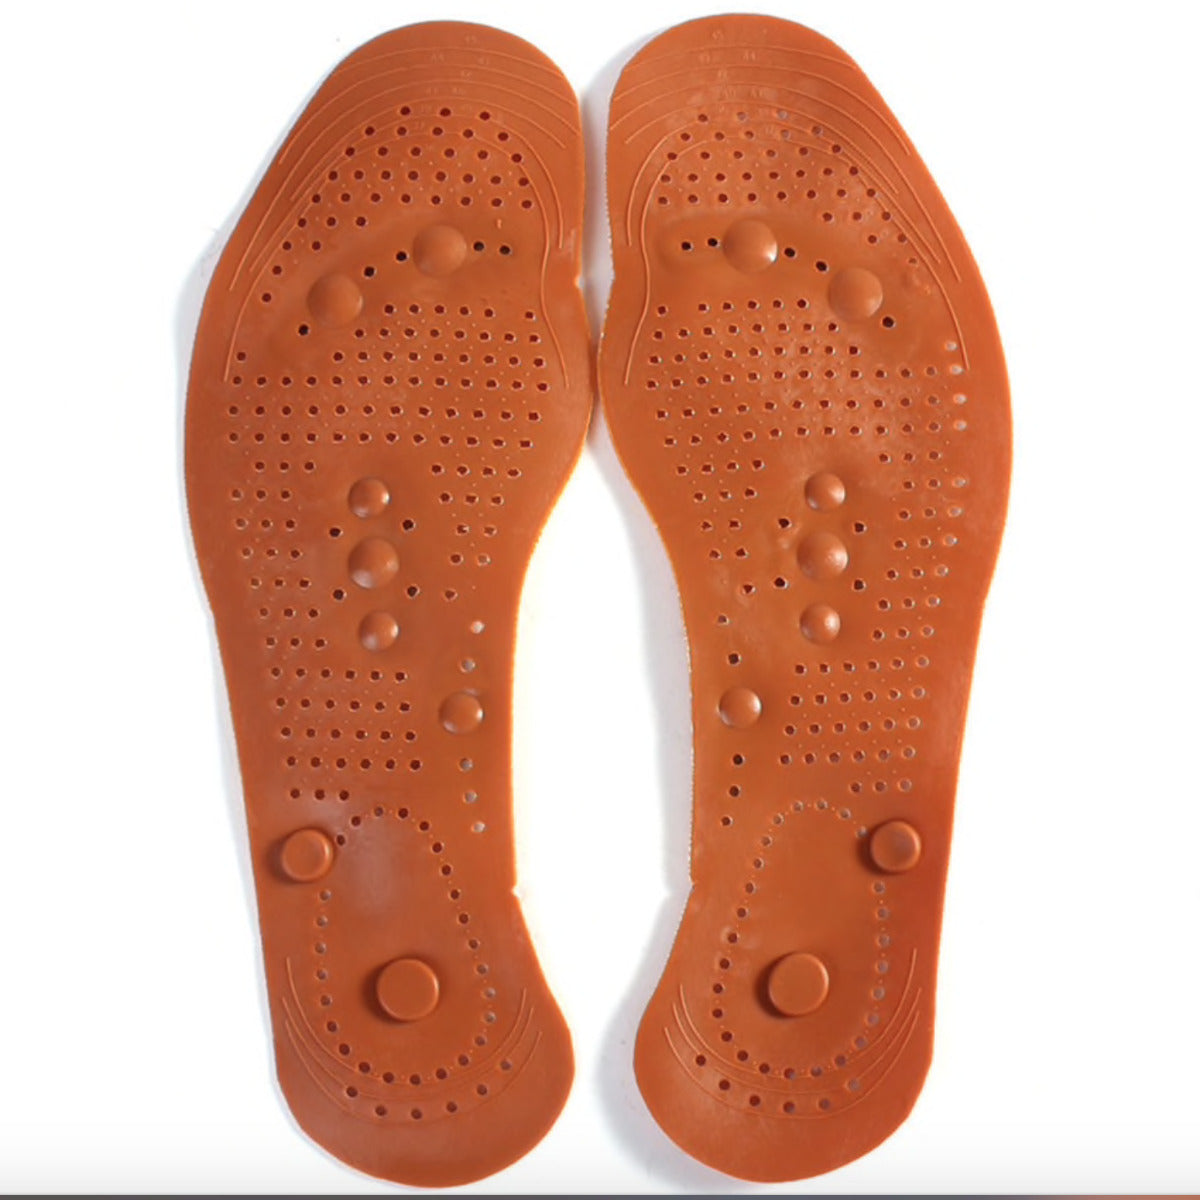 Acupressure Magnetic Reflex Insoles For Back & Foot Pain - Mounteen. Worldwide shipping available.